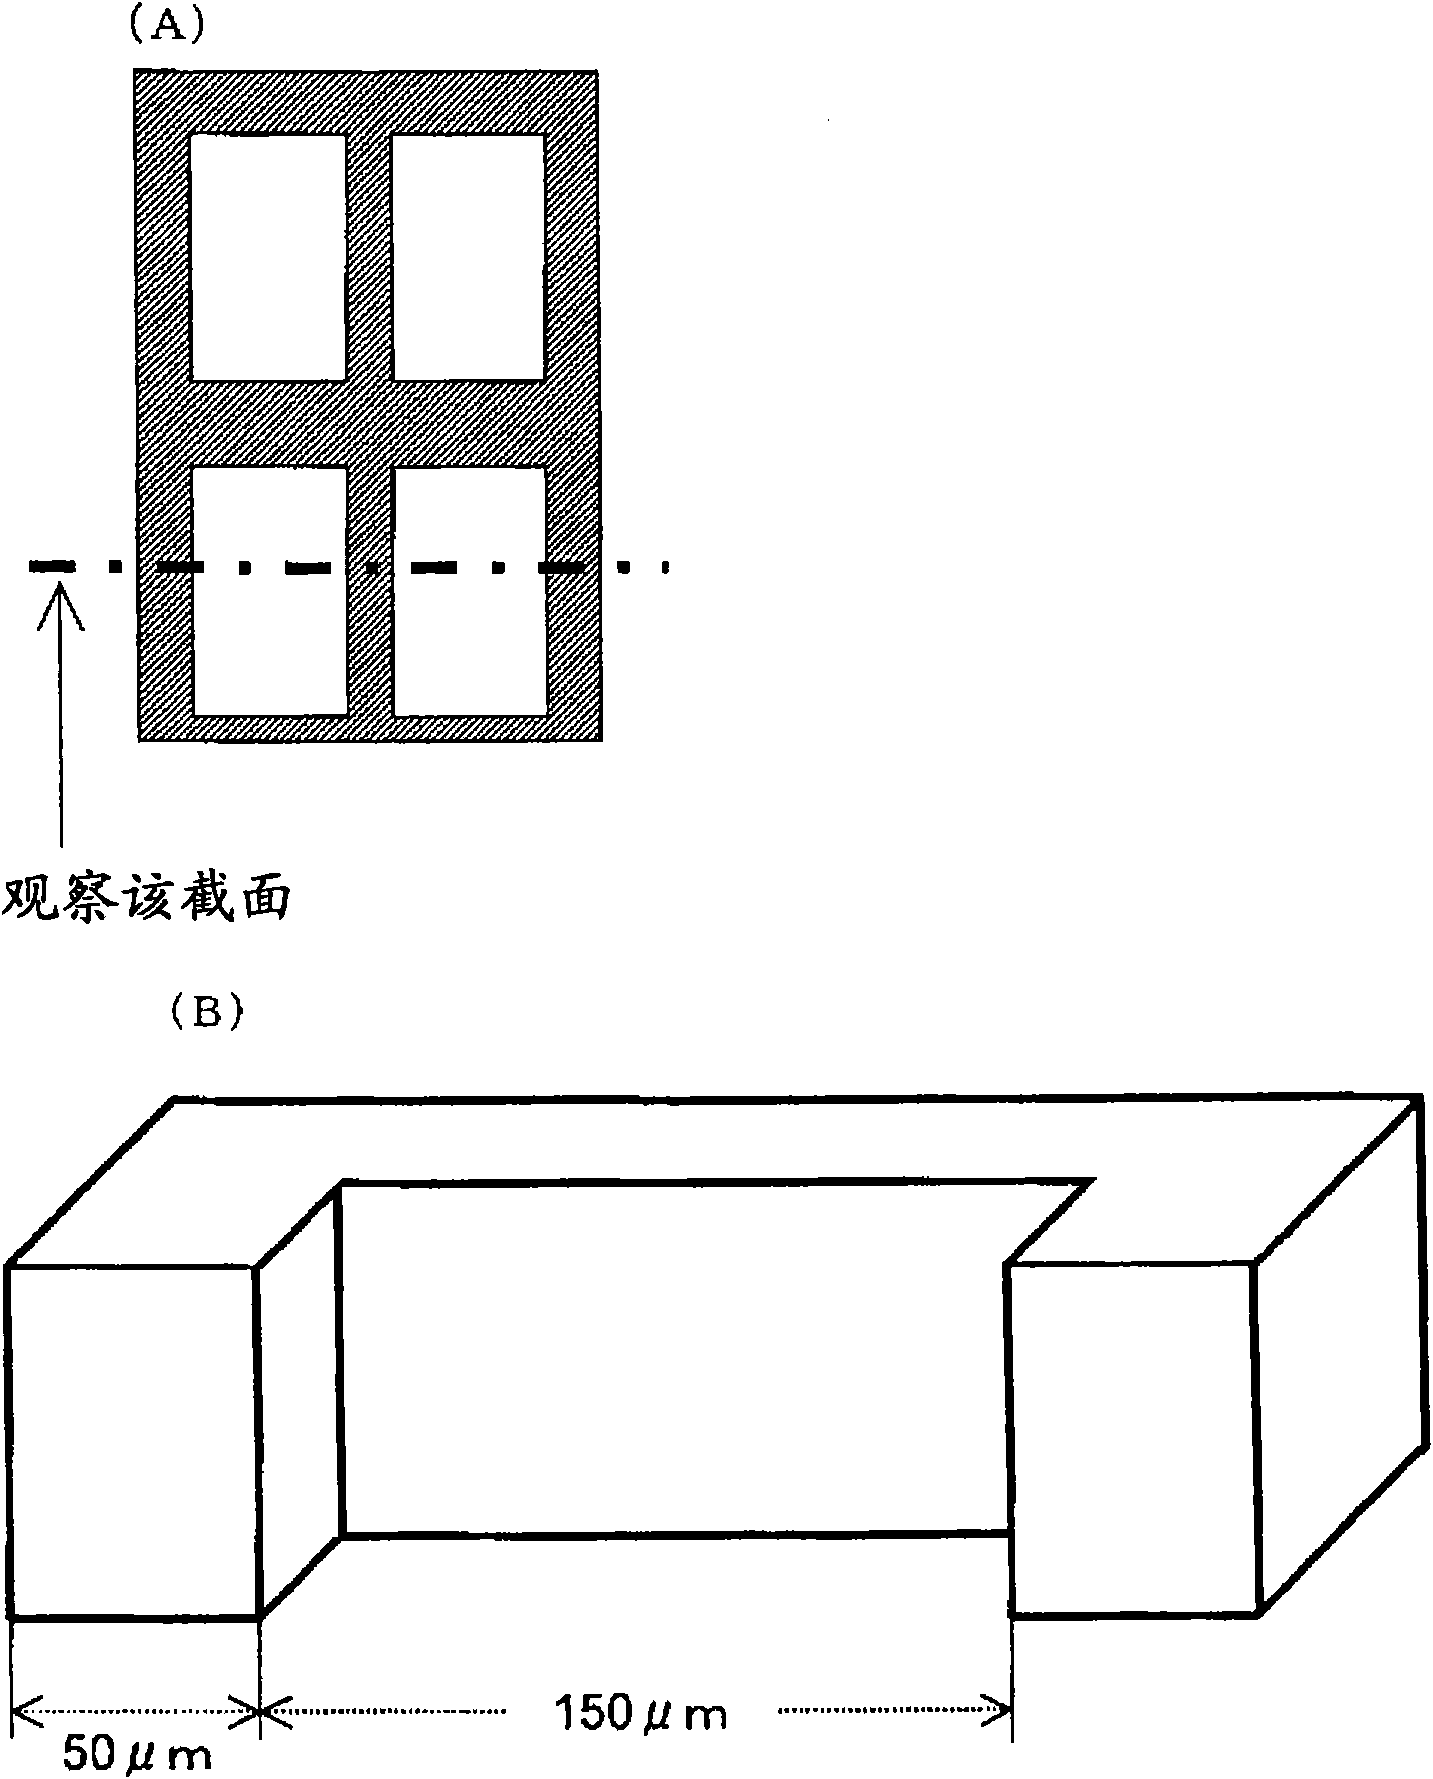 Photosensitive resin composition, photosensitive film, and method for formation of pattern